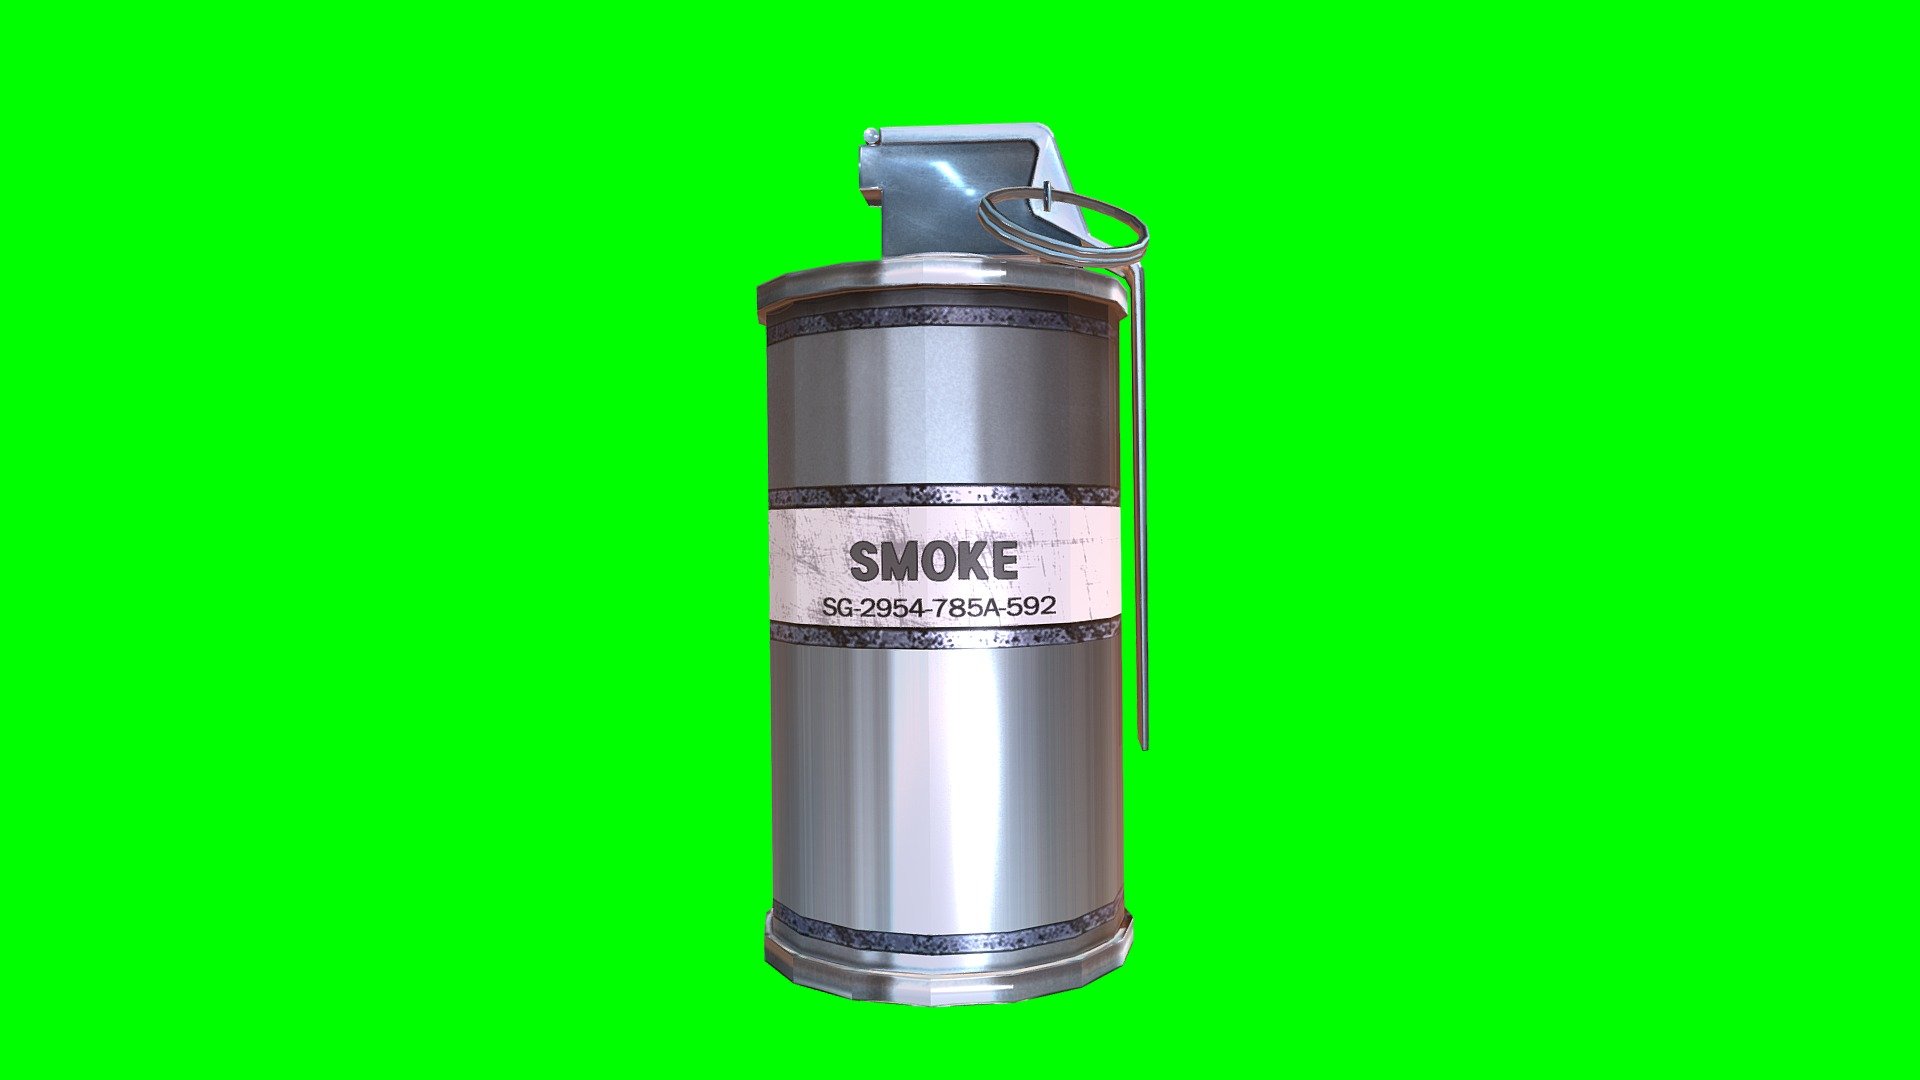 SMOKE-ULTIMATE SILVER WHITE - 3D model by AlxDemento 3d model